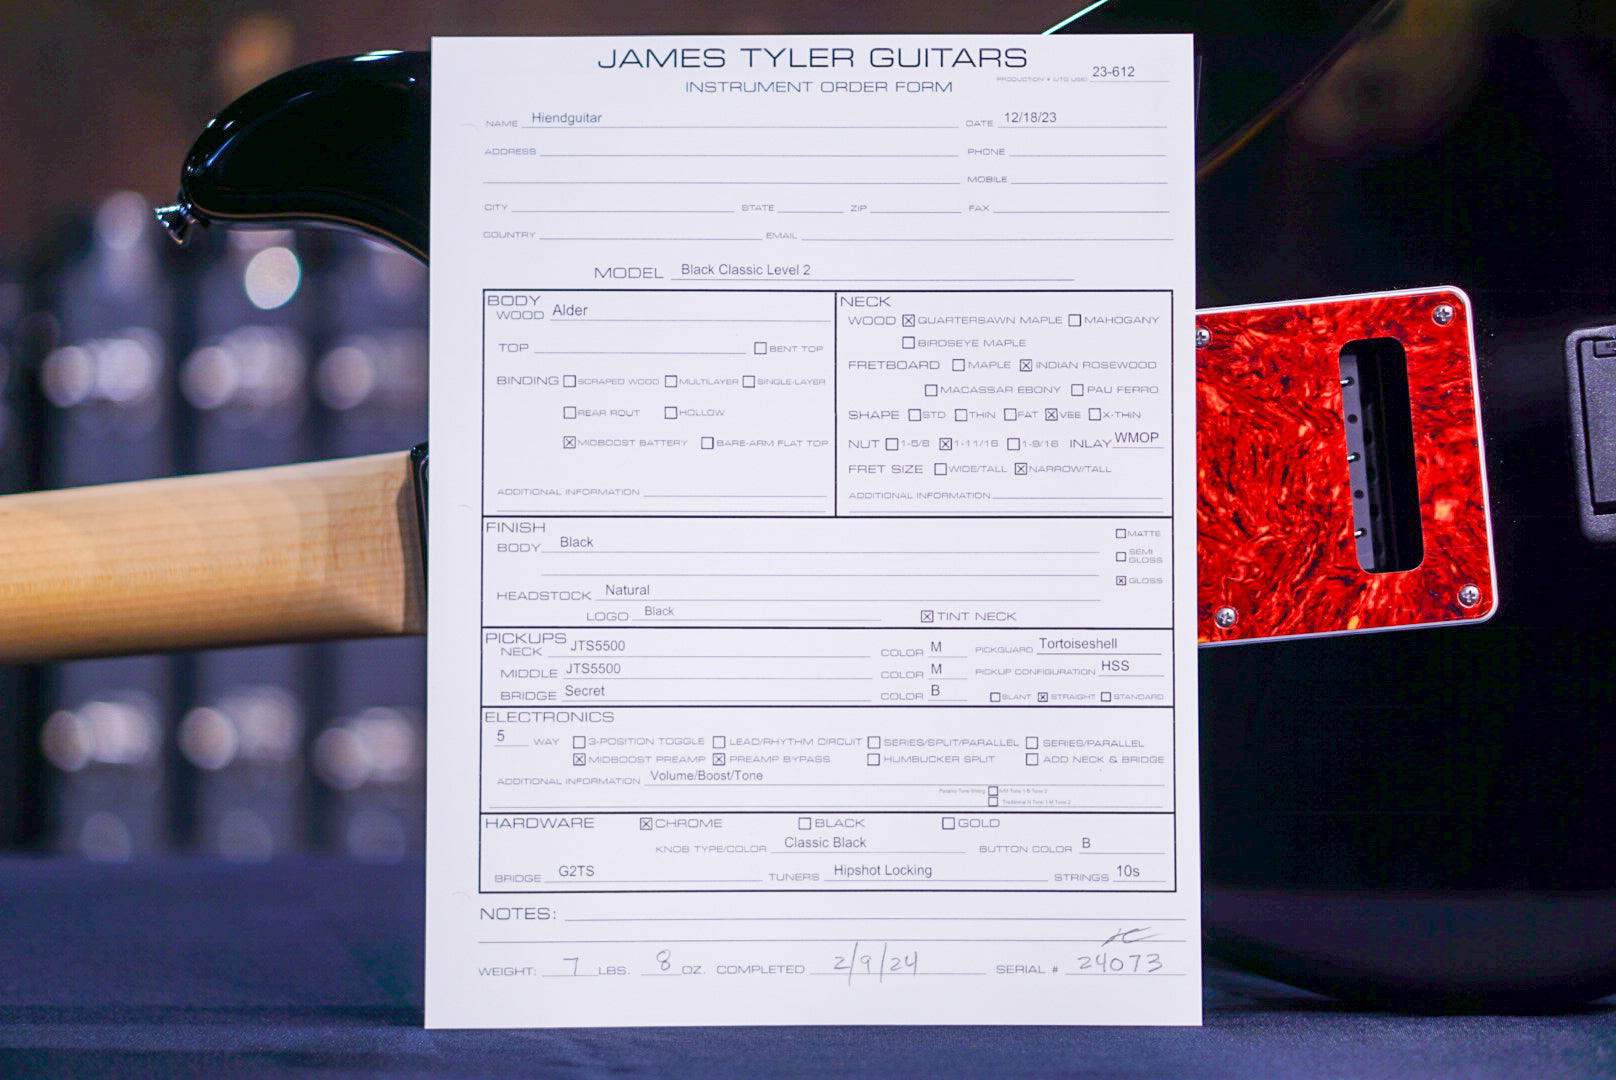 BOOKED! James Tyler black classic level 2 24073